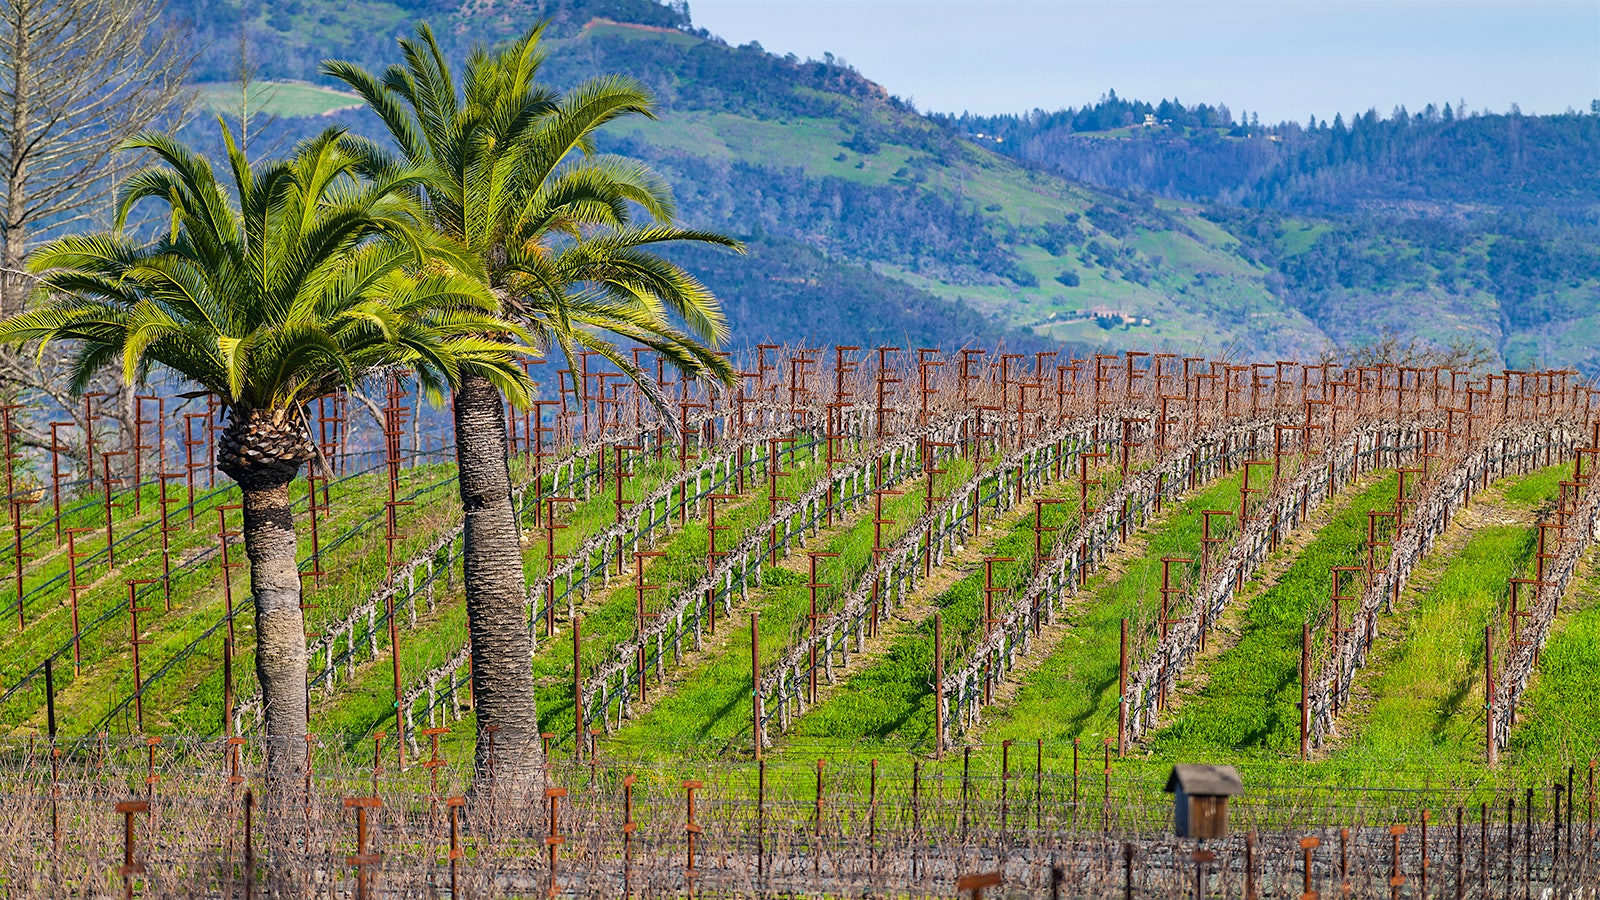  The new Memento Mori vineyard with two palm trees in the foreground